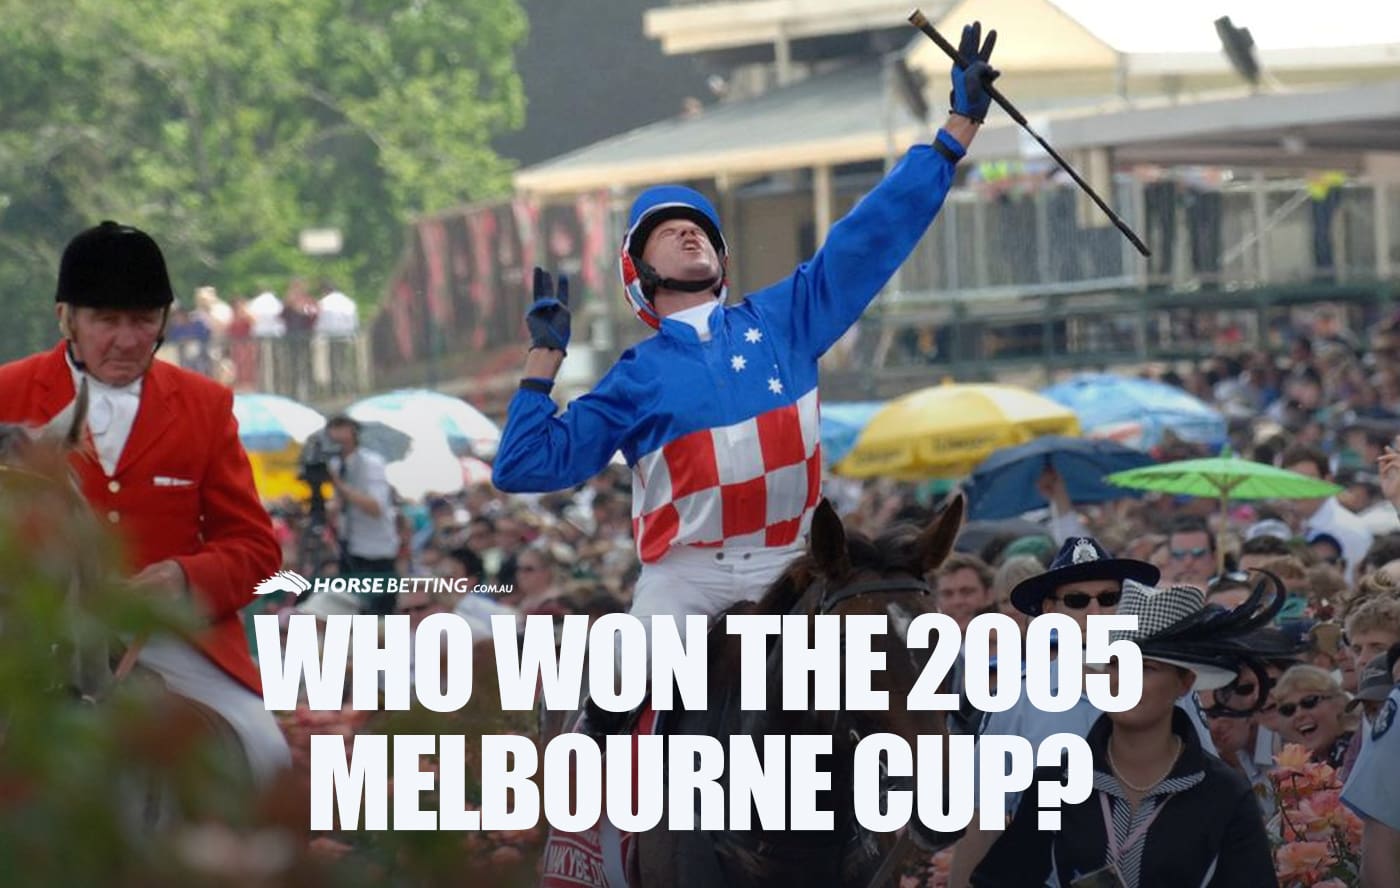 Who won the 2005 Melbourne Cup?